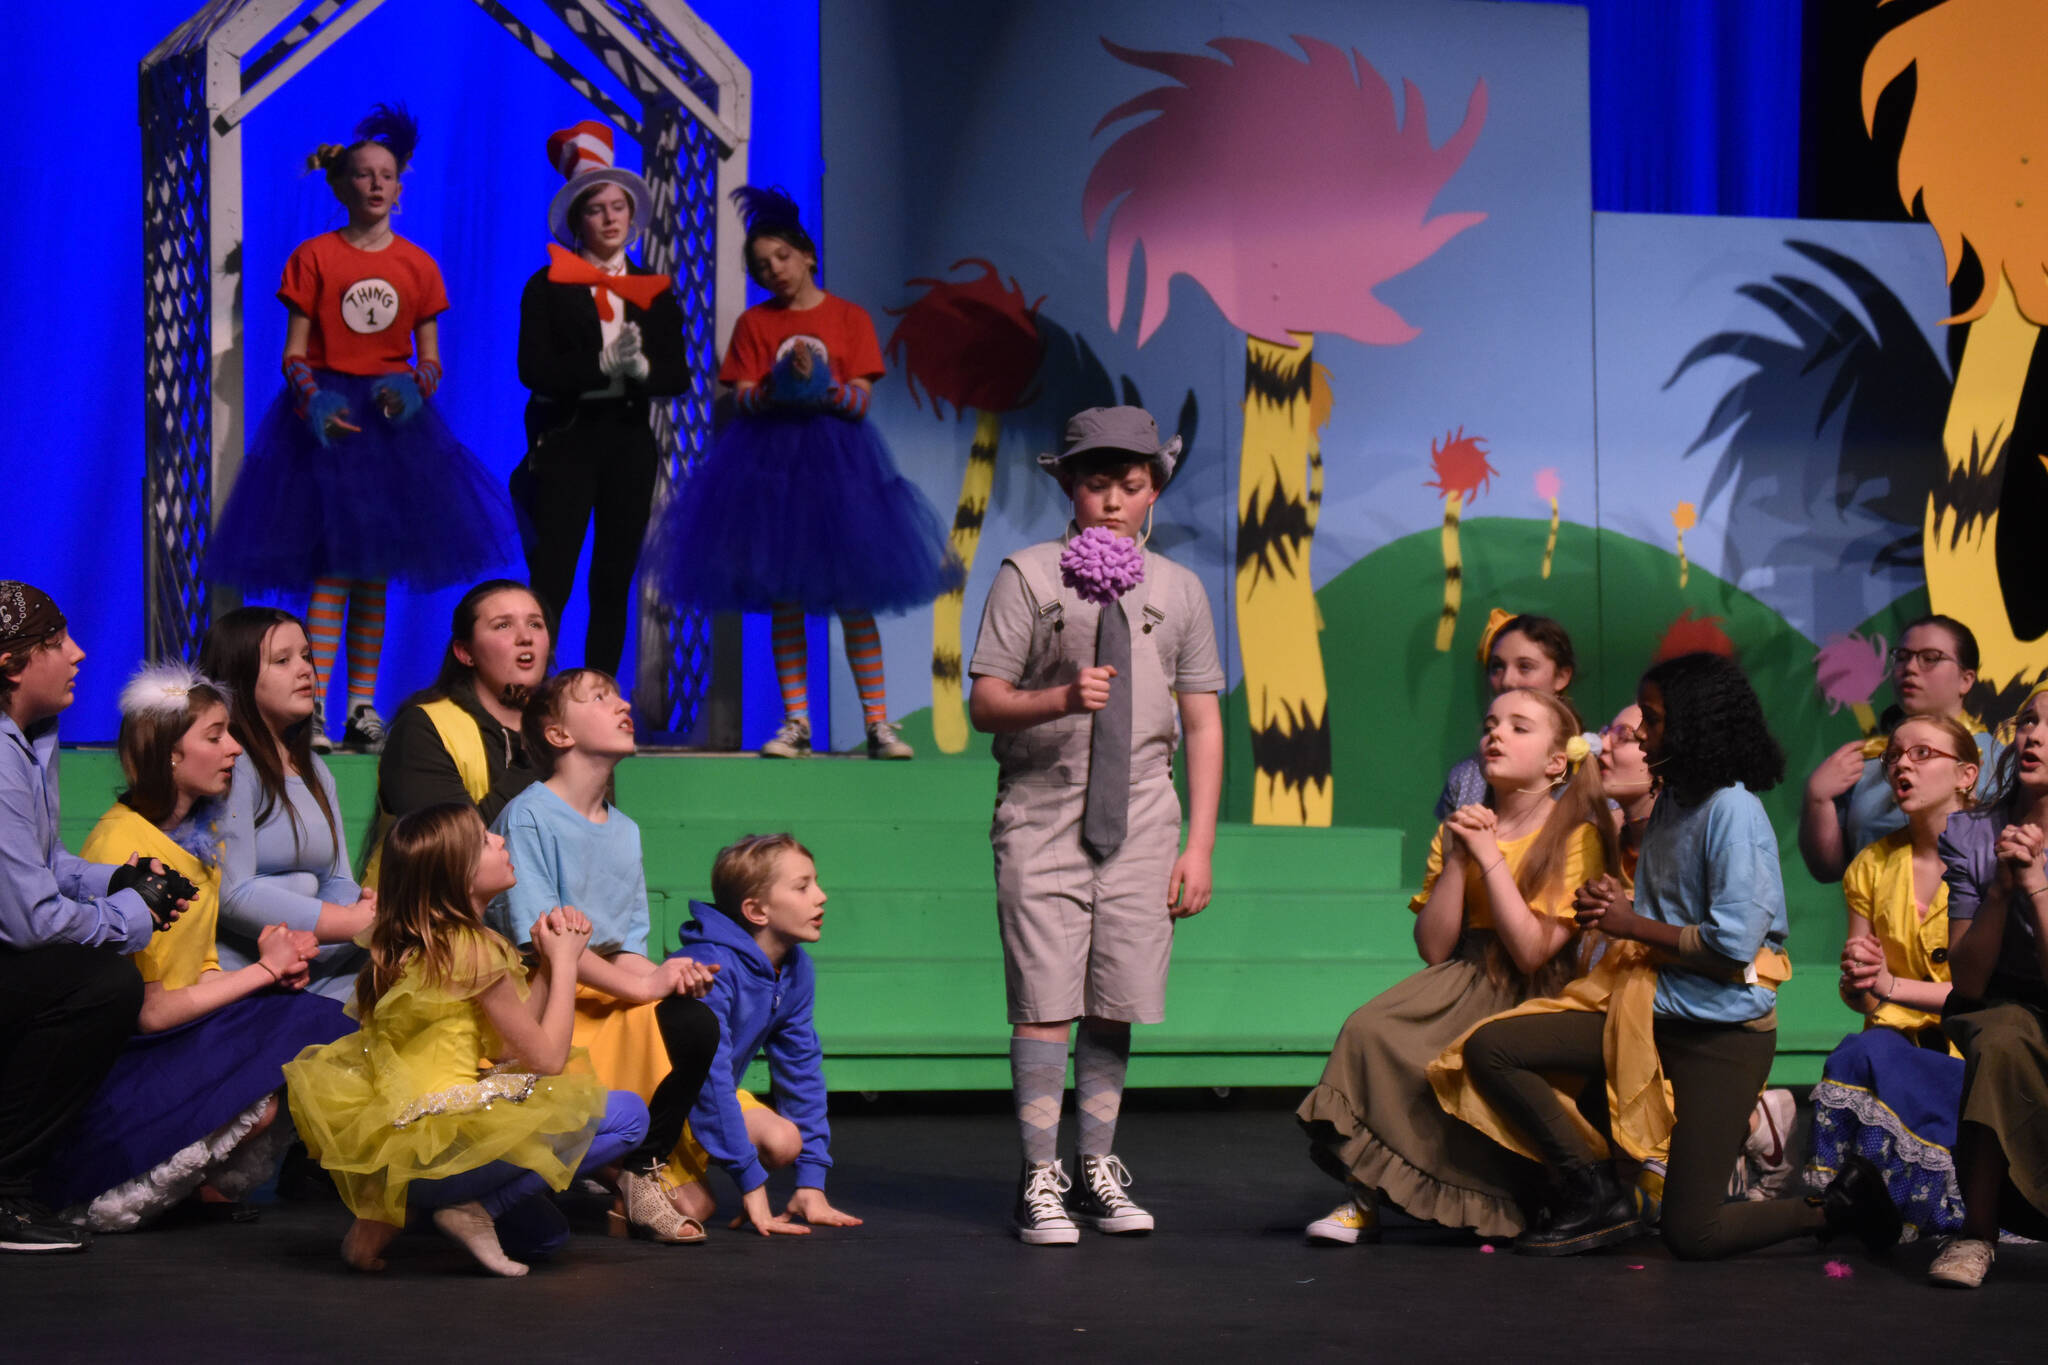 Bowe Meyers, as Horton, and the cast of Triumvirate Theatre’s production of “Seussical” rehearse on Wednesday, Feb. 8, 2023, in the Renee C. Henderson Auditorium at Kenai Central High School in Kenai, Alaska. (Jake Dye/Peninsula Clarion)